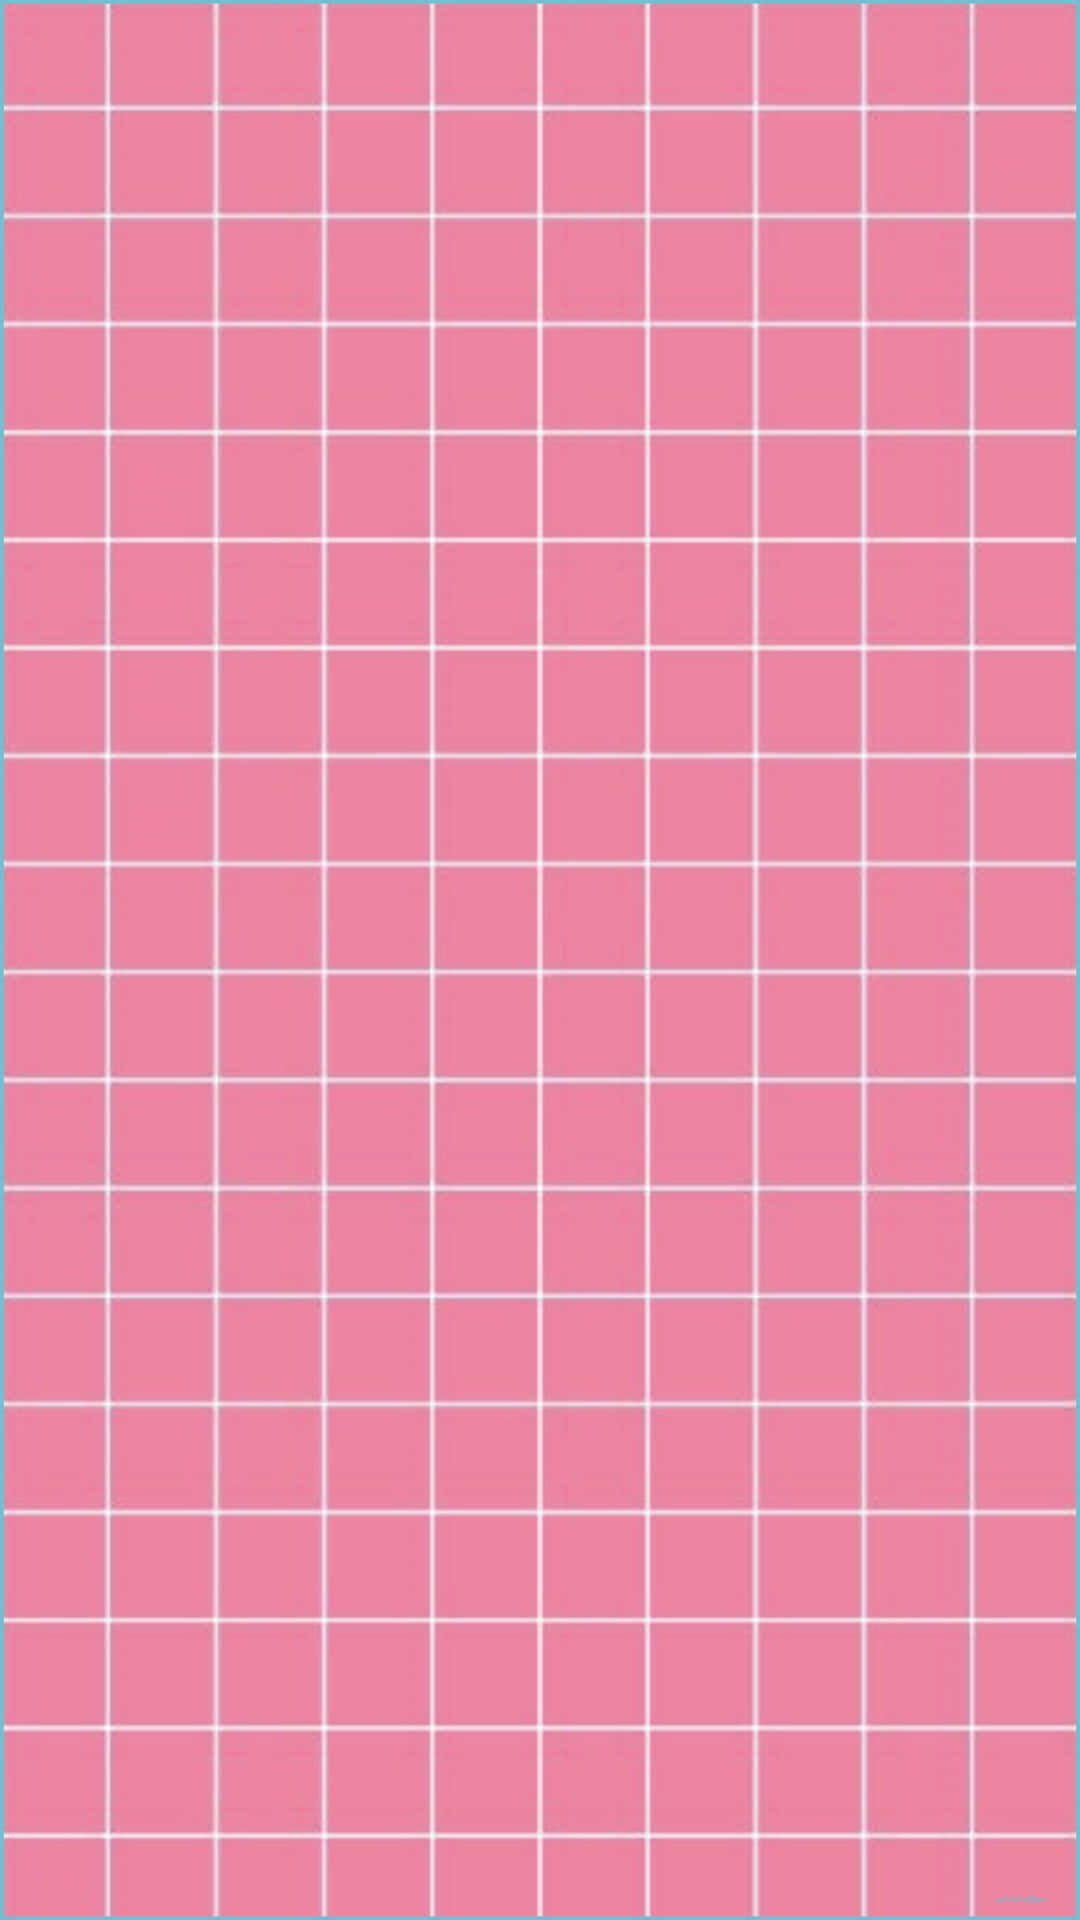 A Pink Grid Pattern With Squares On It Wallpaper